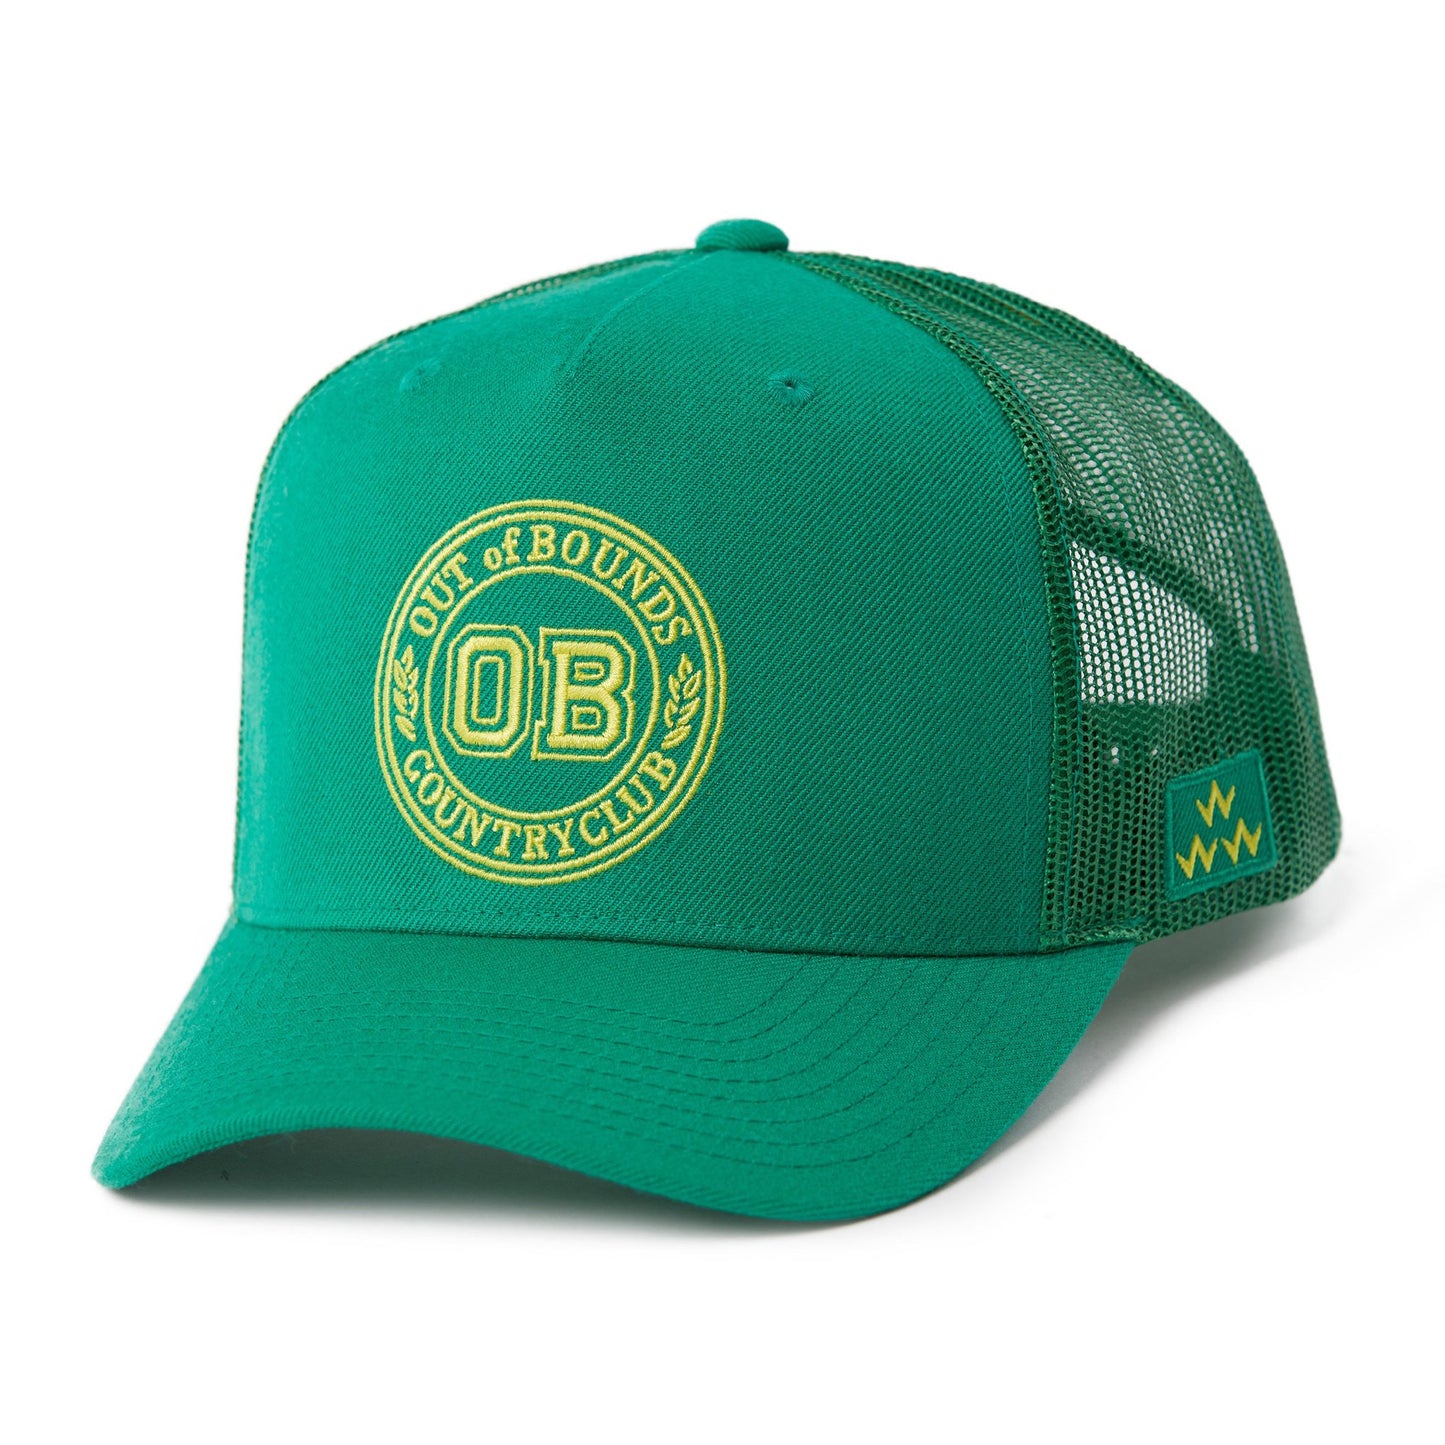 Out of Bounds Trucker Snapback